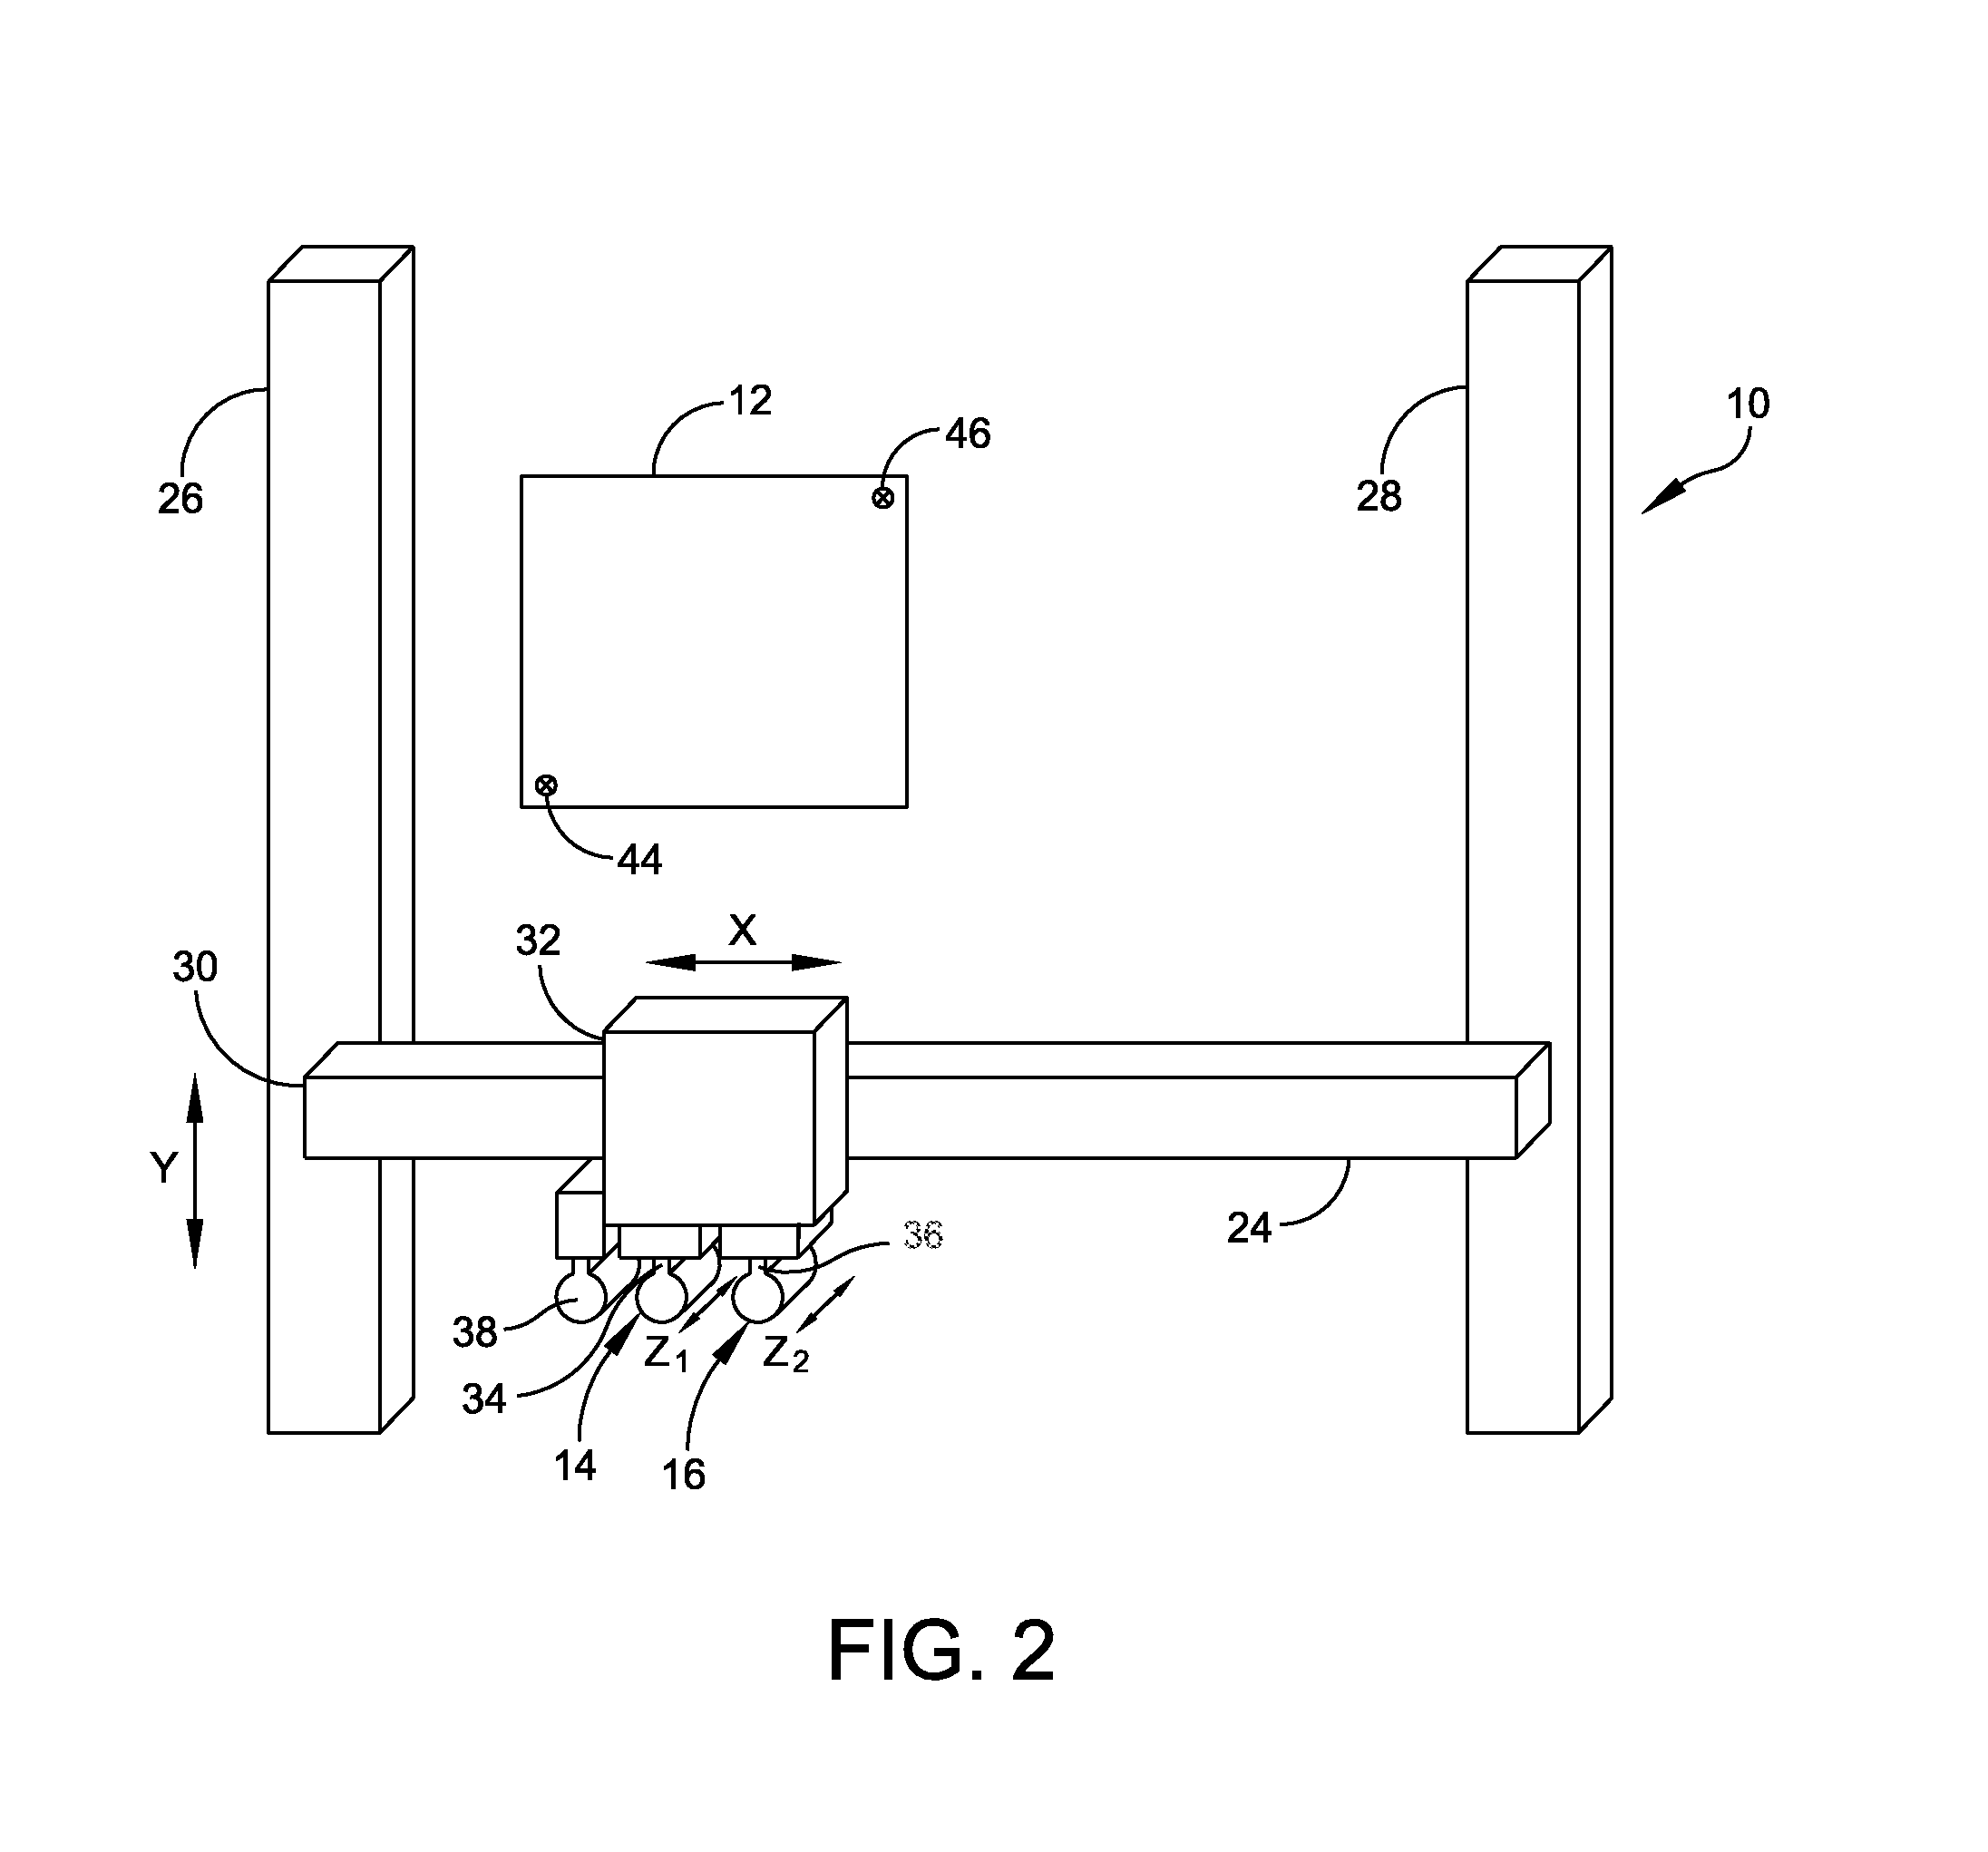 Method and apparatus for automatically adjusting dispensing units of a dispenser